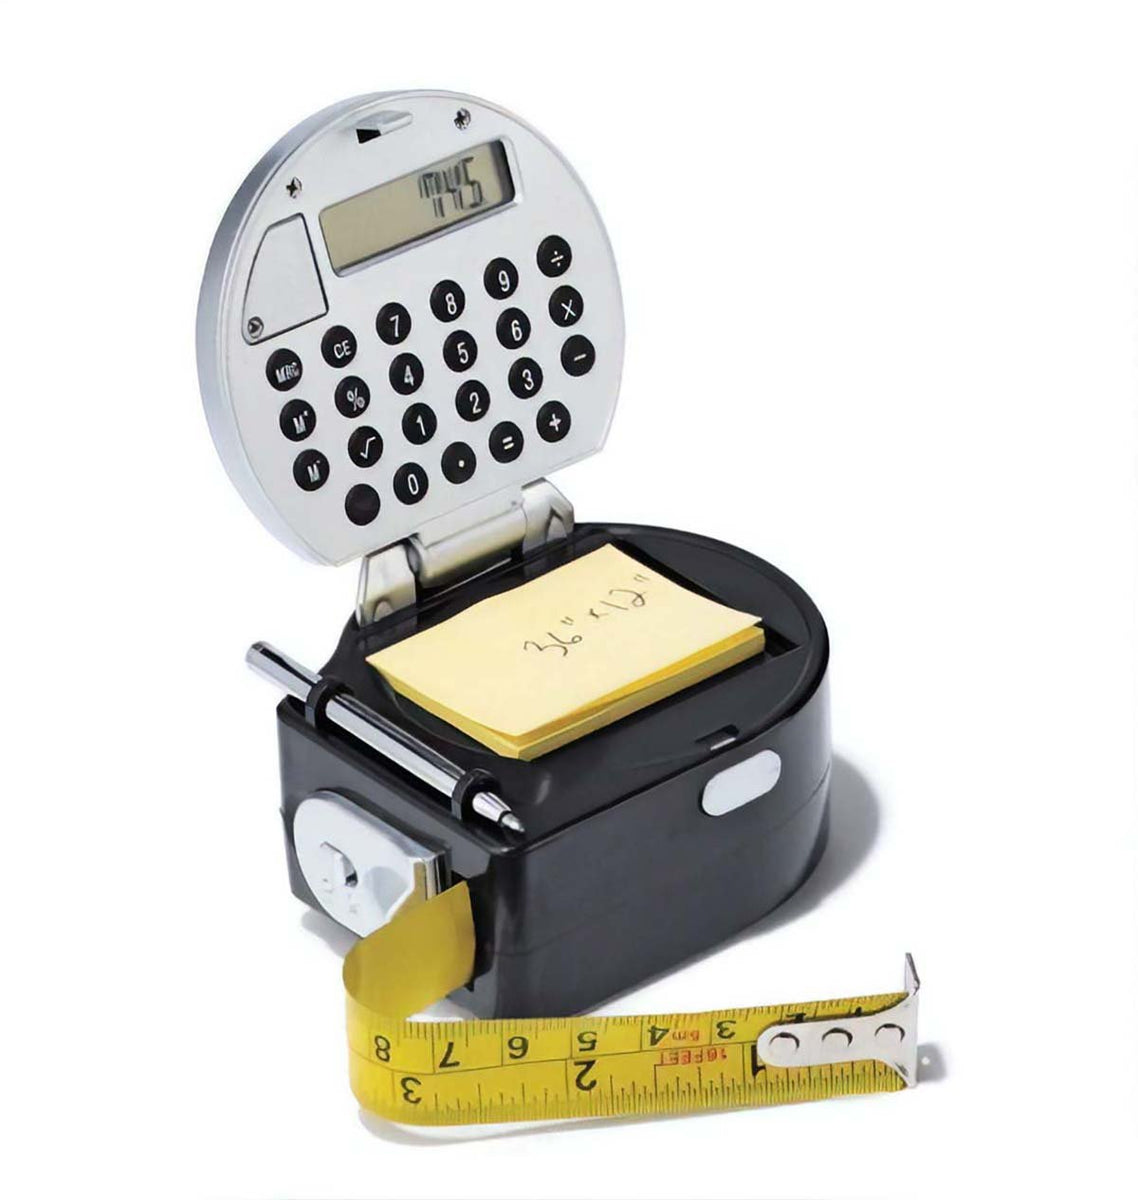 MATEY MEASURE™ tape measure aid. Don't guess it - MATEY